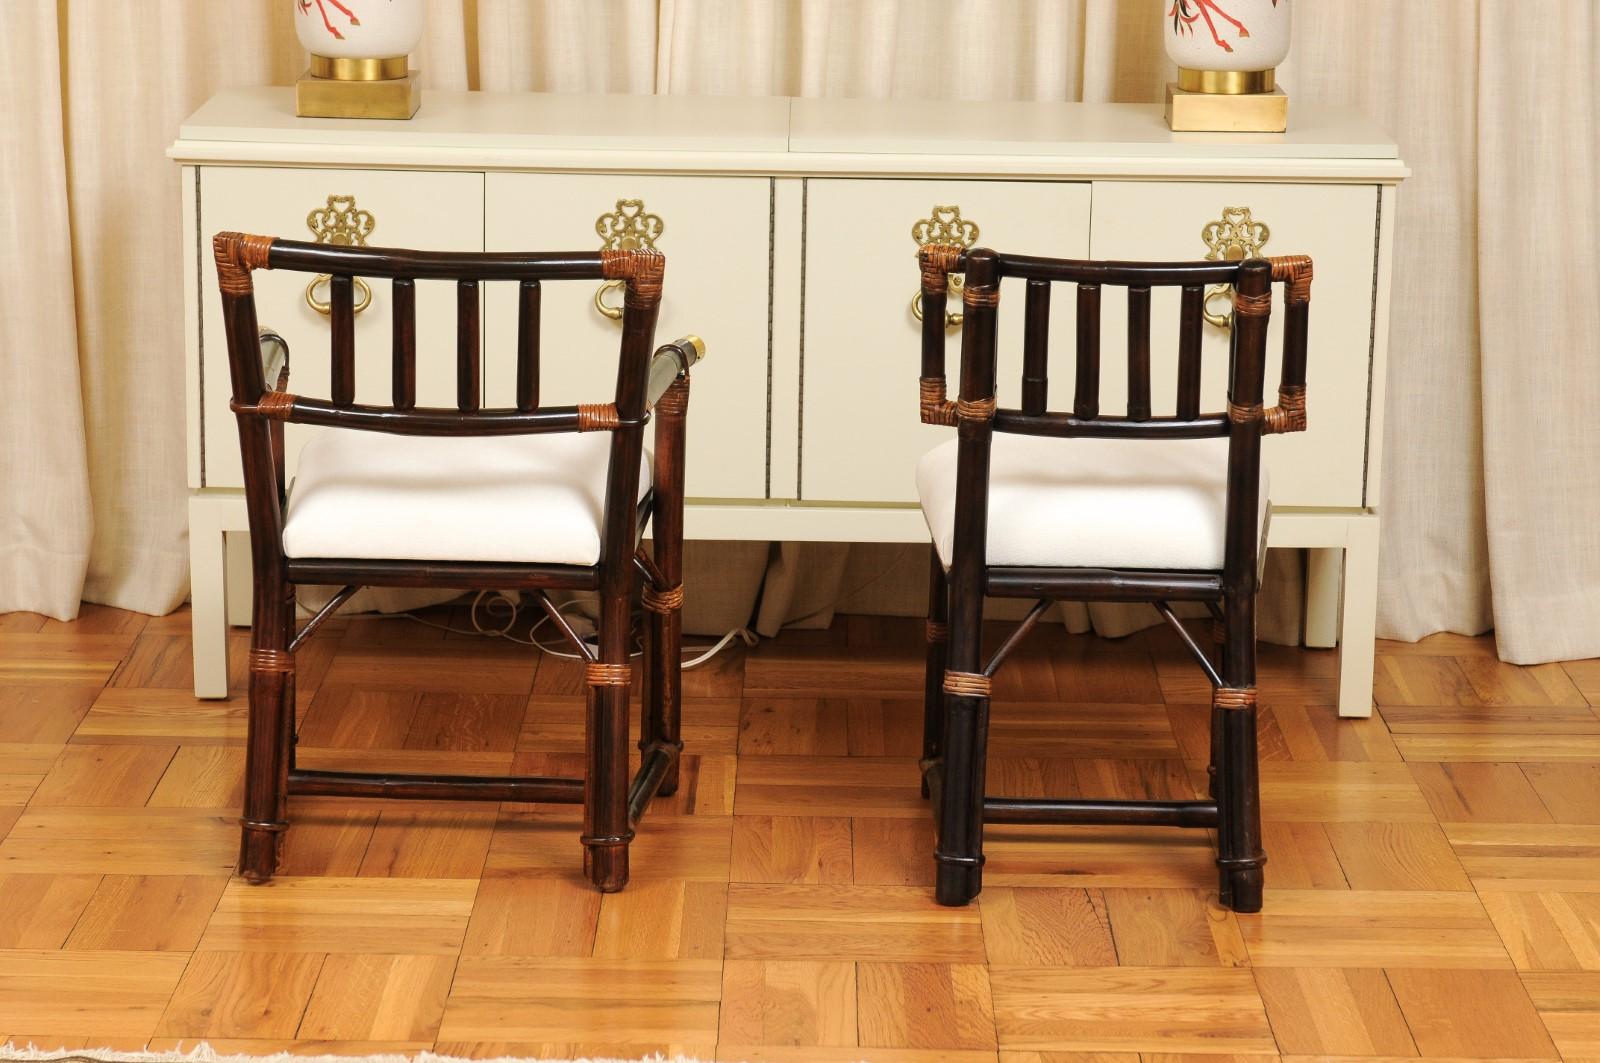 Radiant Set of 14 Rattan Chairs in Cordovan and Caramel by Wisner for Ficks Reed For Sale 4